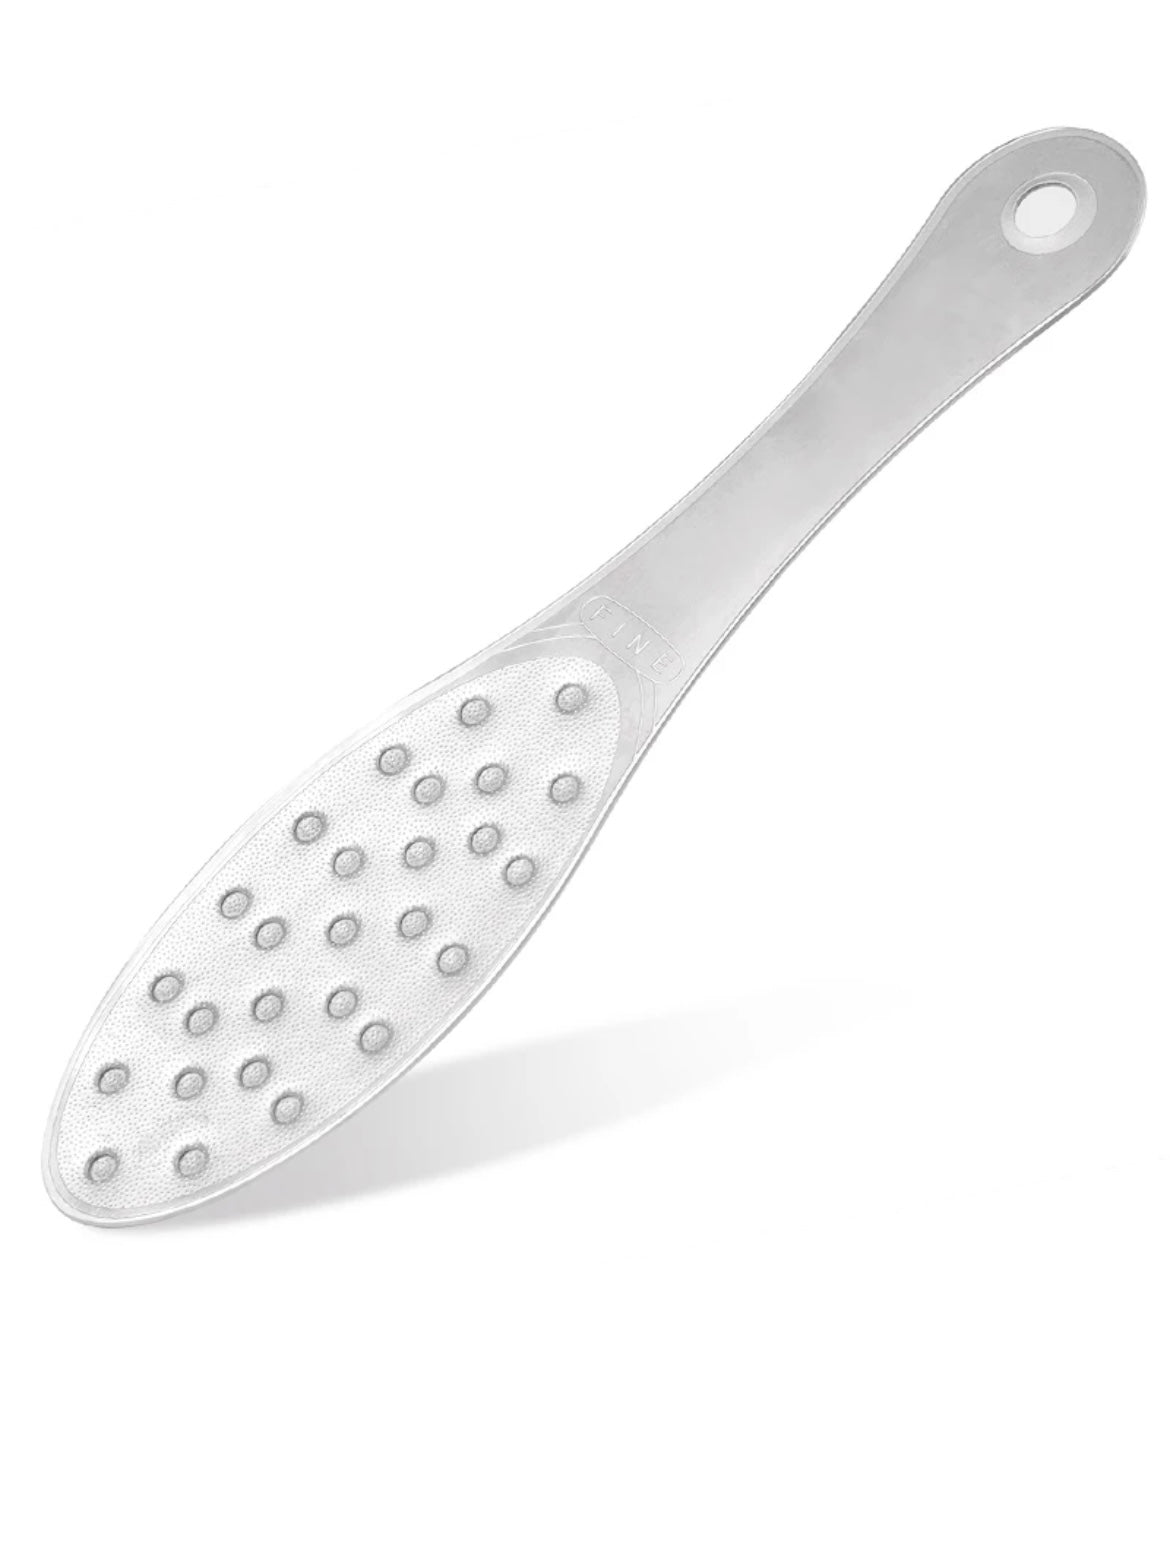 Footlogix Double-Sided Stainless Steel Sanitizable Foot File